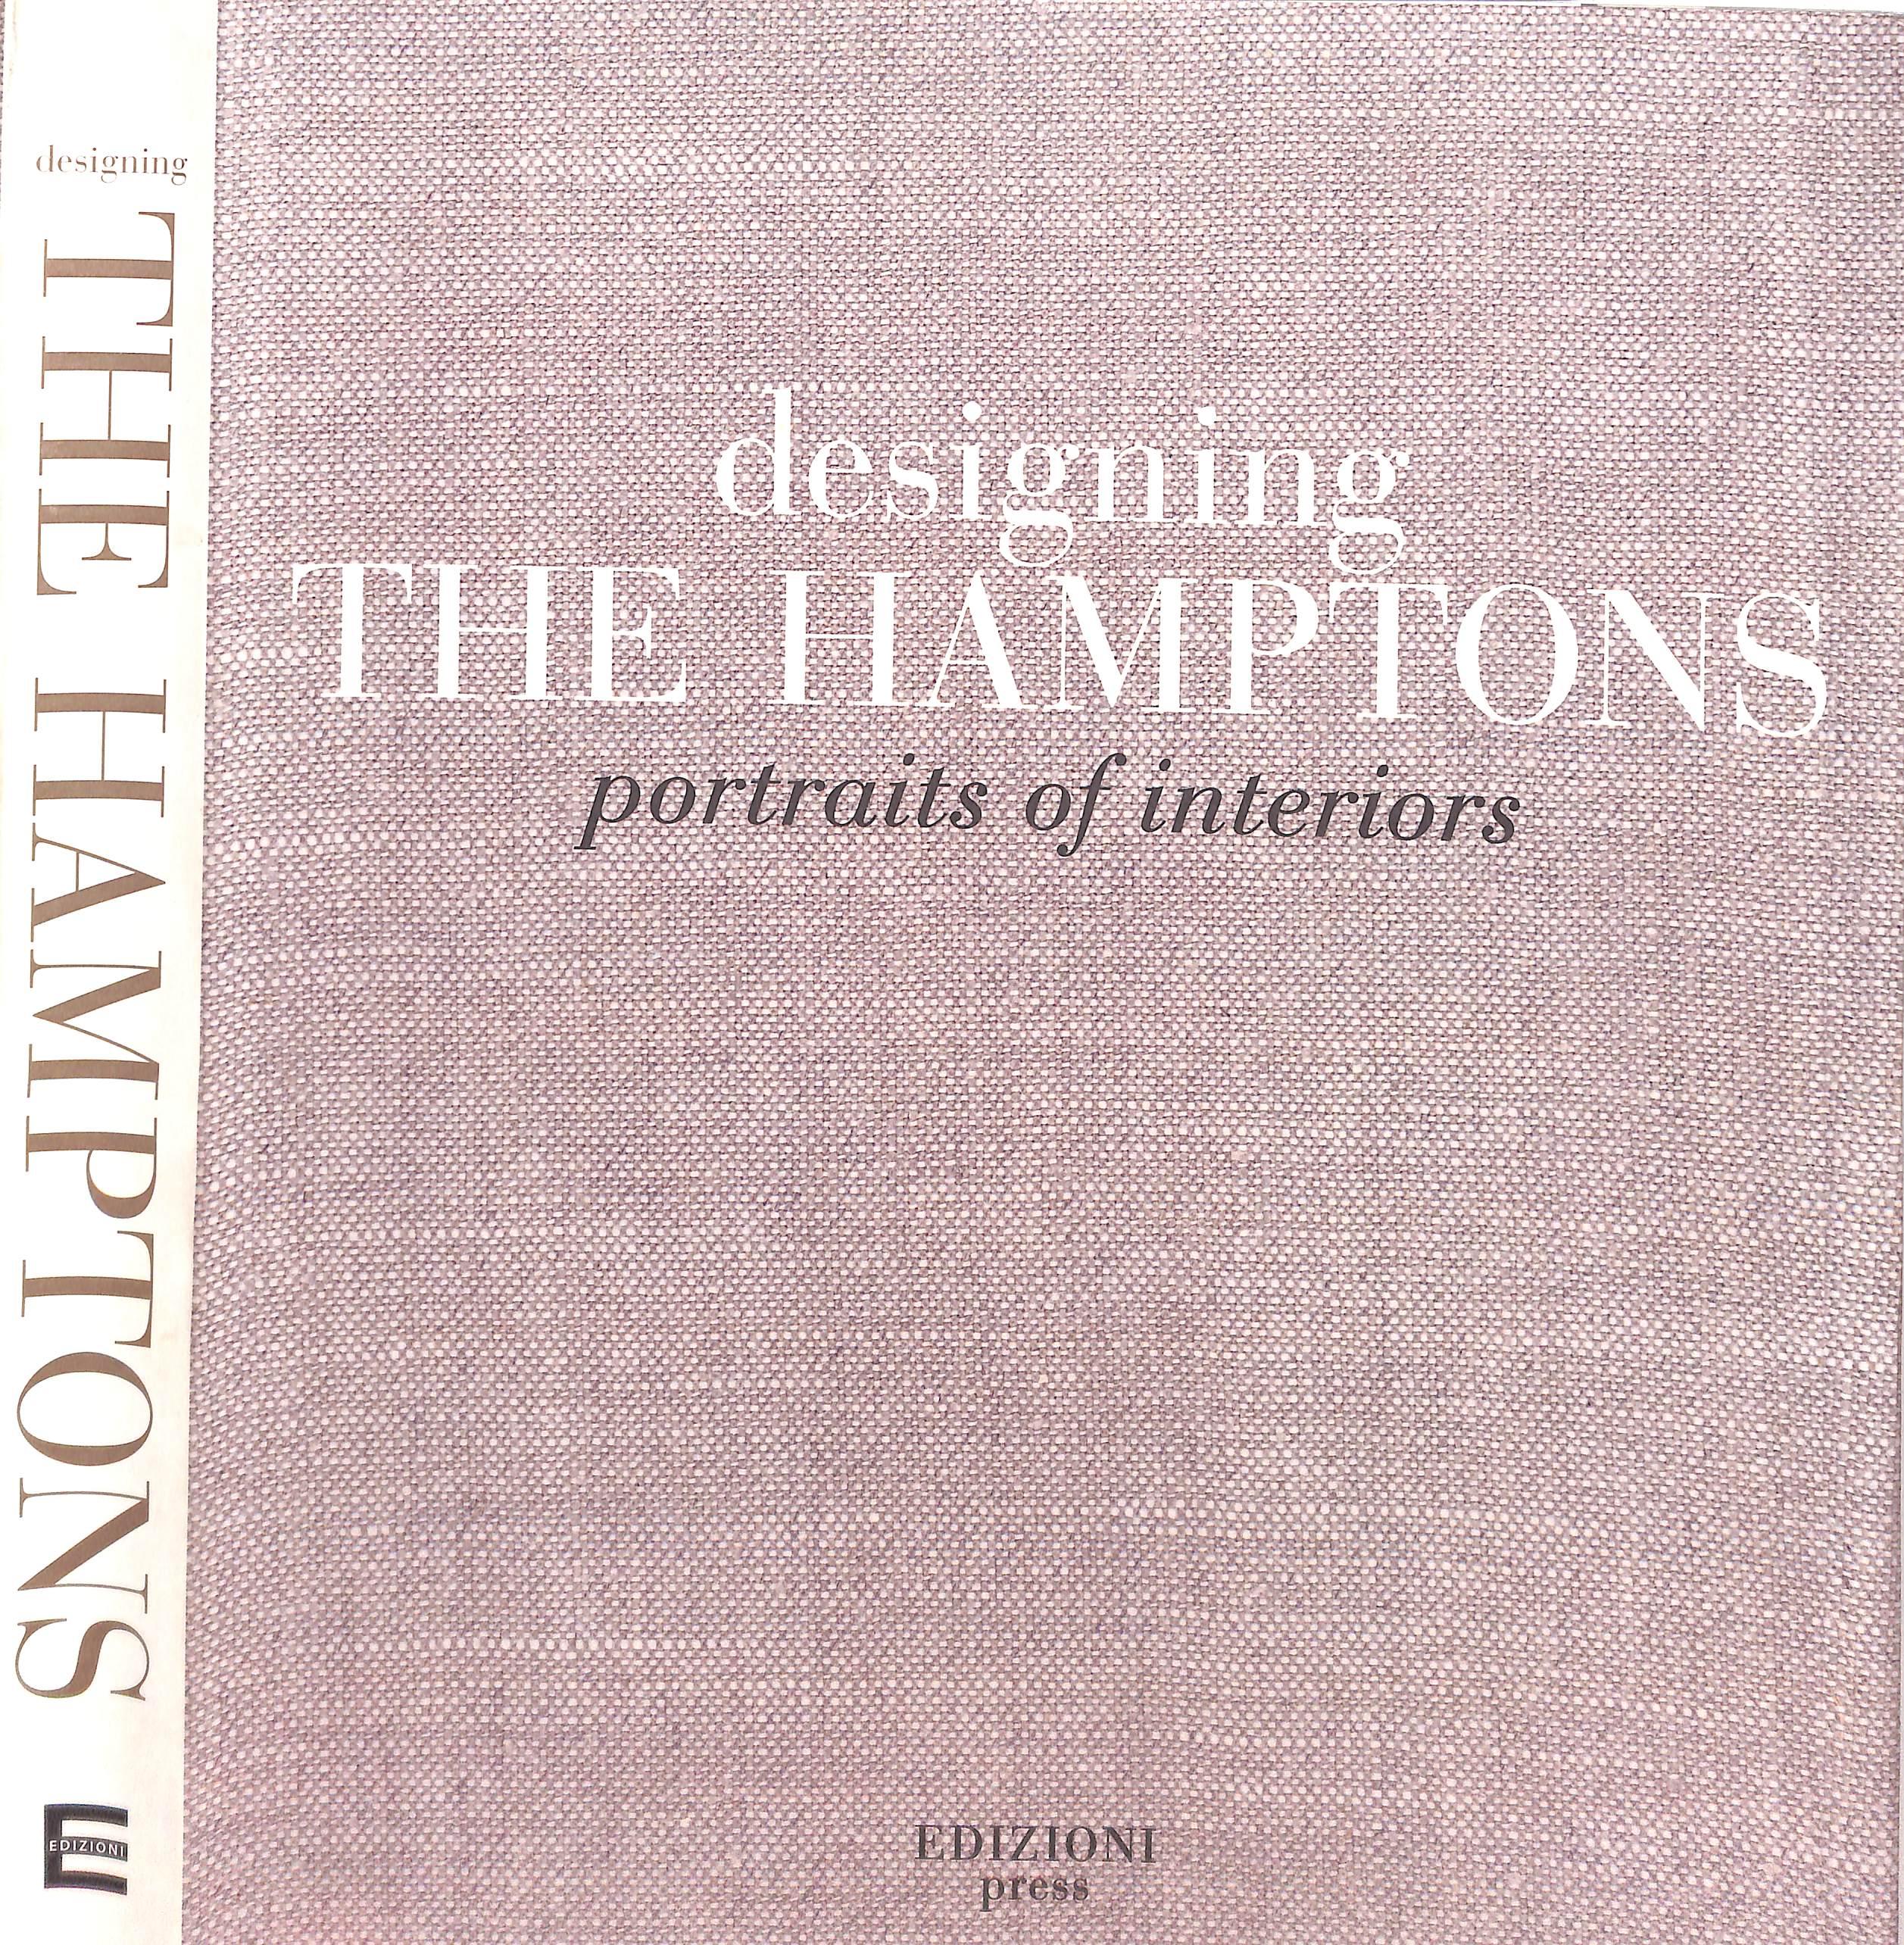 "Designing The Hamptons: Portraits Of Interiors" 2006 LIND, Diana [edited by] - Art by Unknown